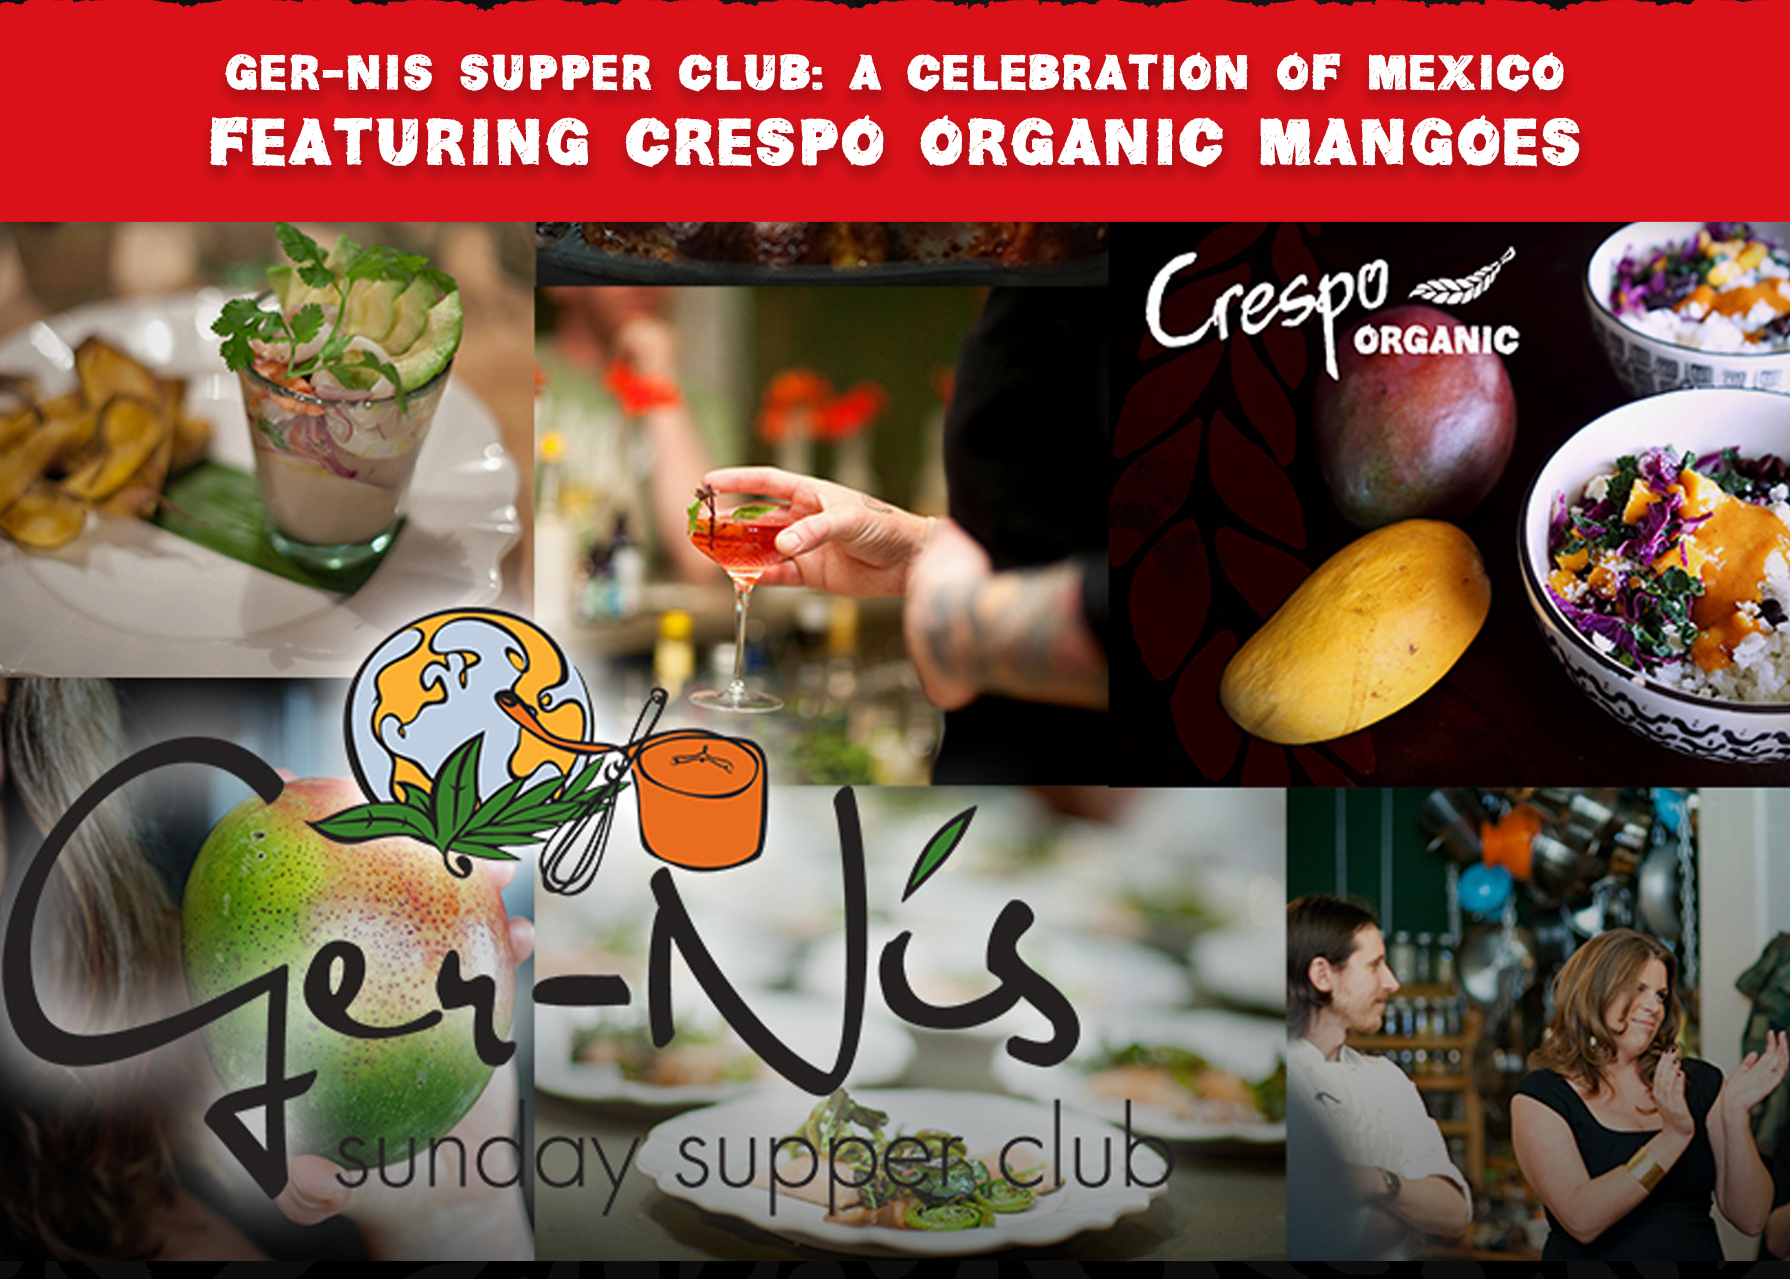 Celebrating Mexico & Mangoes with Ger-Nis